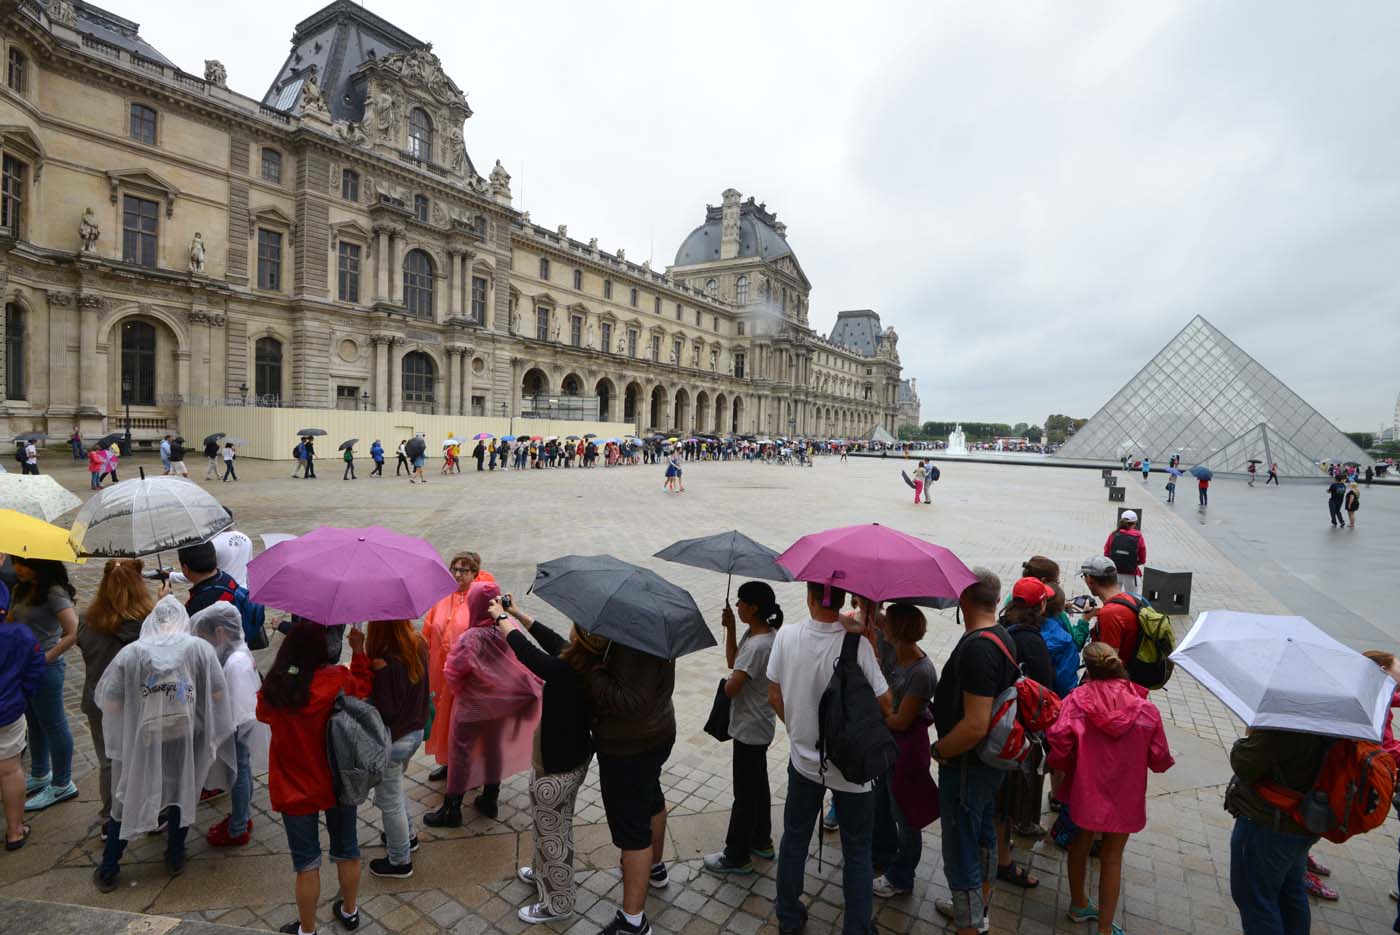 (FILES) This file photo taken on August 08, 2014 shows people queueing under the rain to get in the Louvre Museum in Paris. After a decline in 2016 due to the terror attacks in Paris and Nice, tourism in Paris and Ile de France is in much better shape in the first half of 2017, with 1,5 million tourists and 3,3 million overnight stays more than a year ago. / AFP PHOTO / DOMINIQUE FAGET